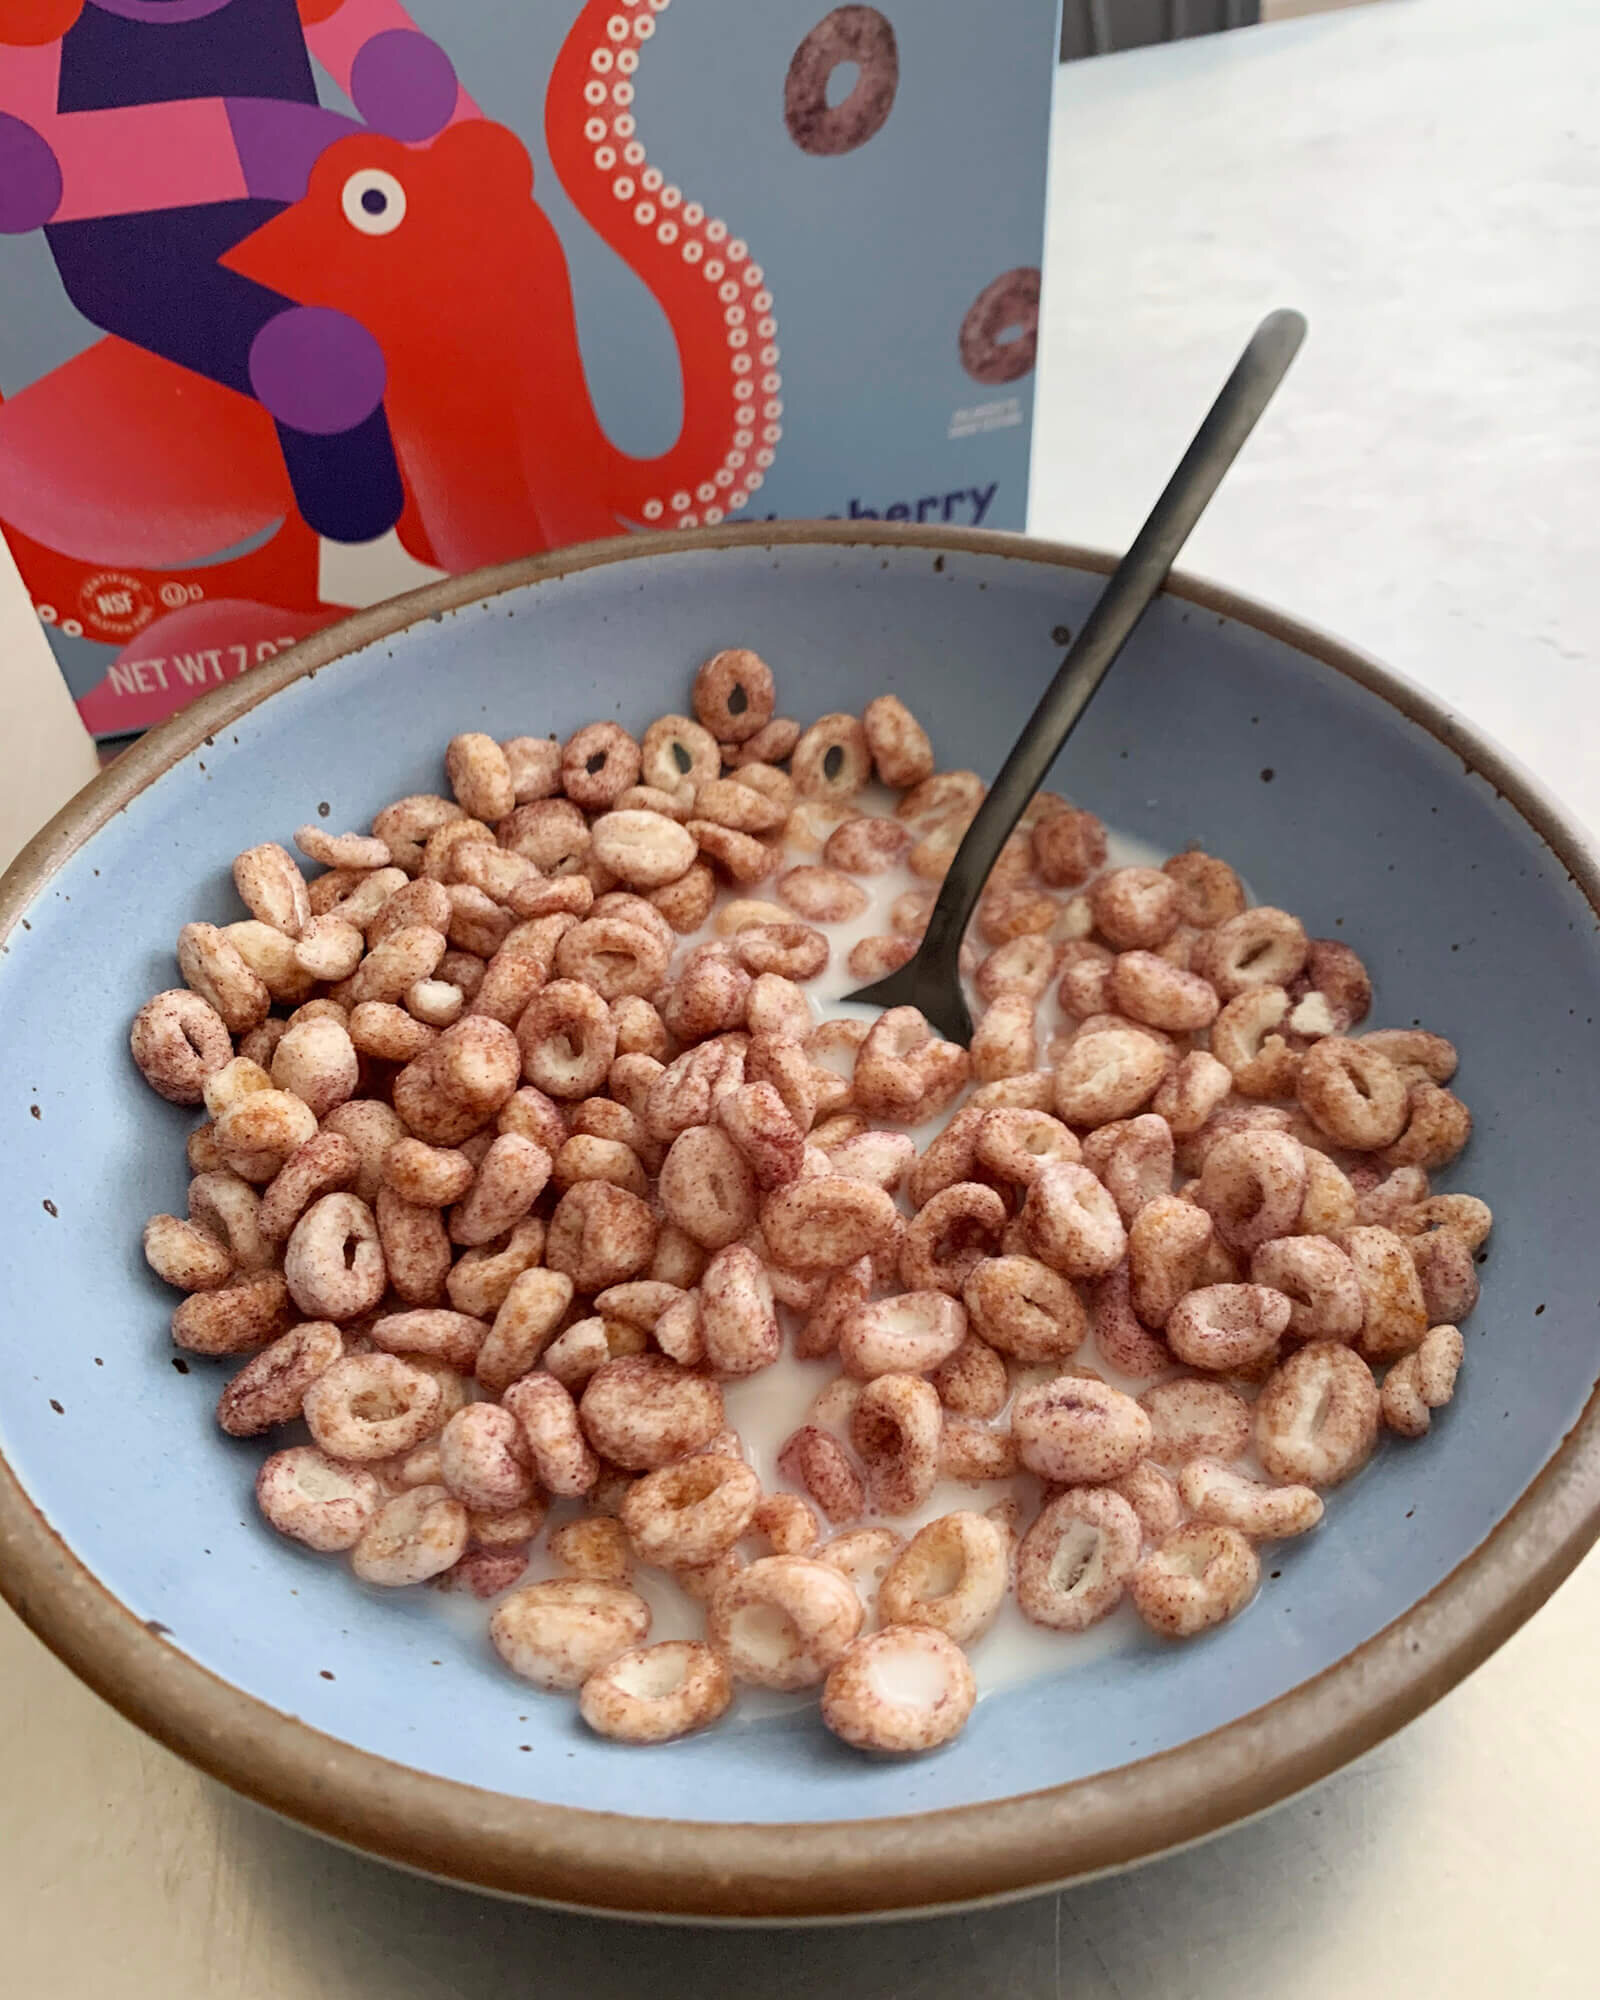 keto-review-magic-spoon-cereal-keto-in-the-city